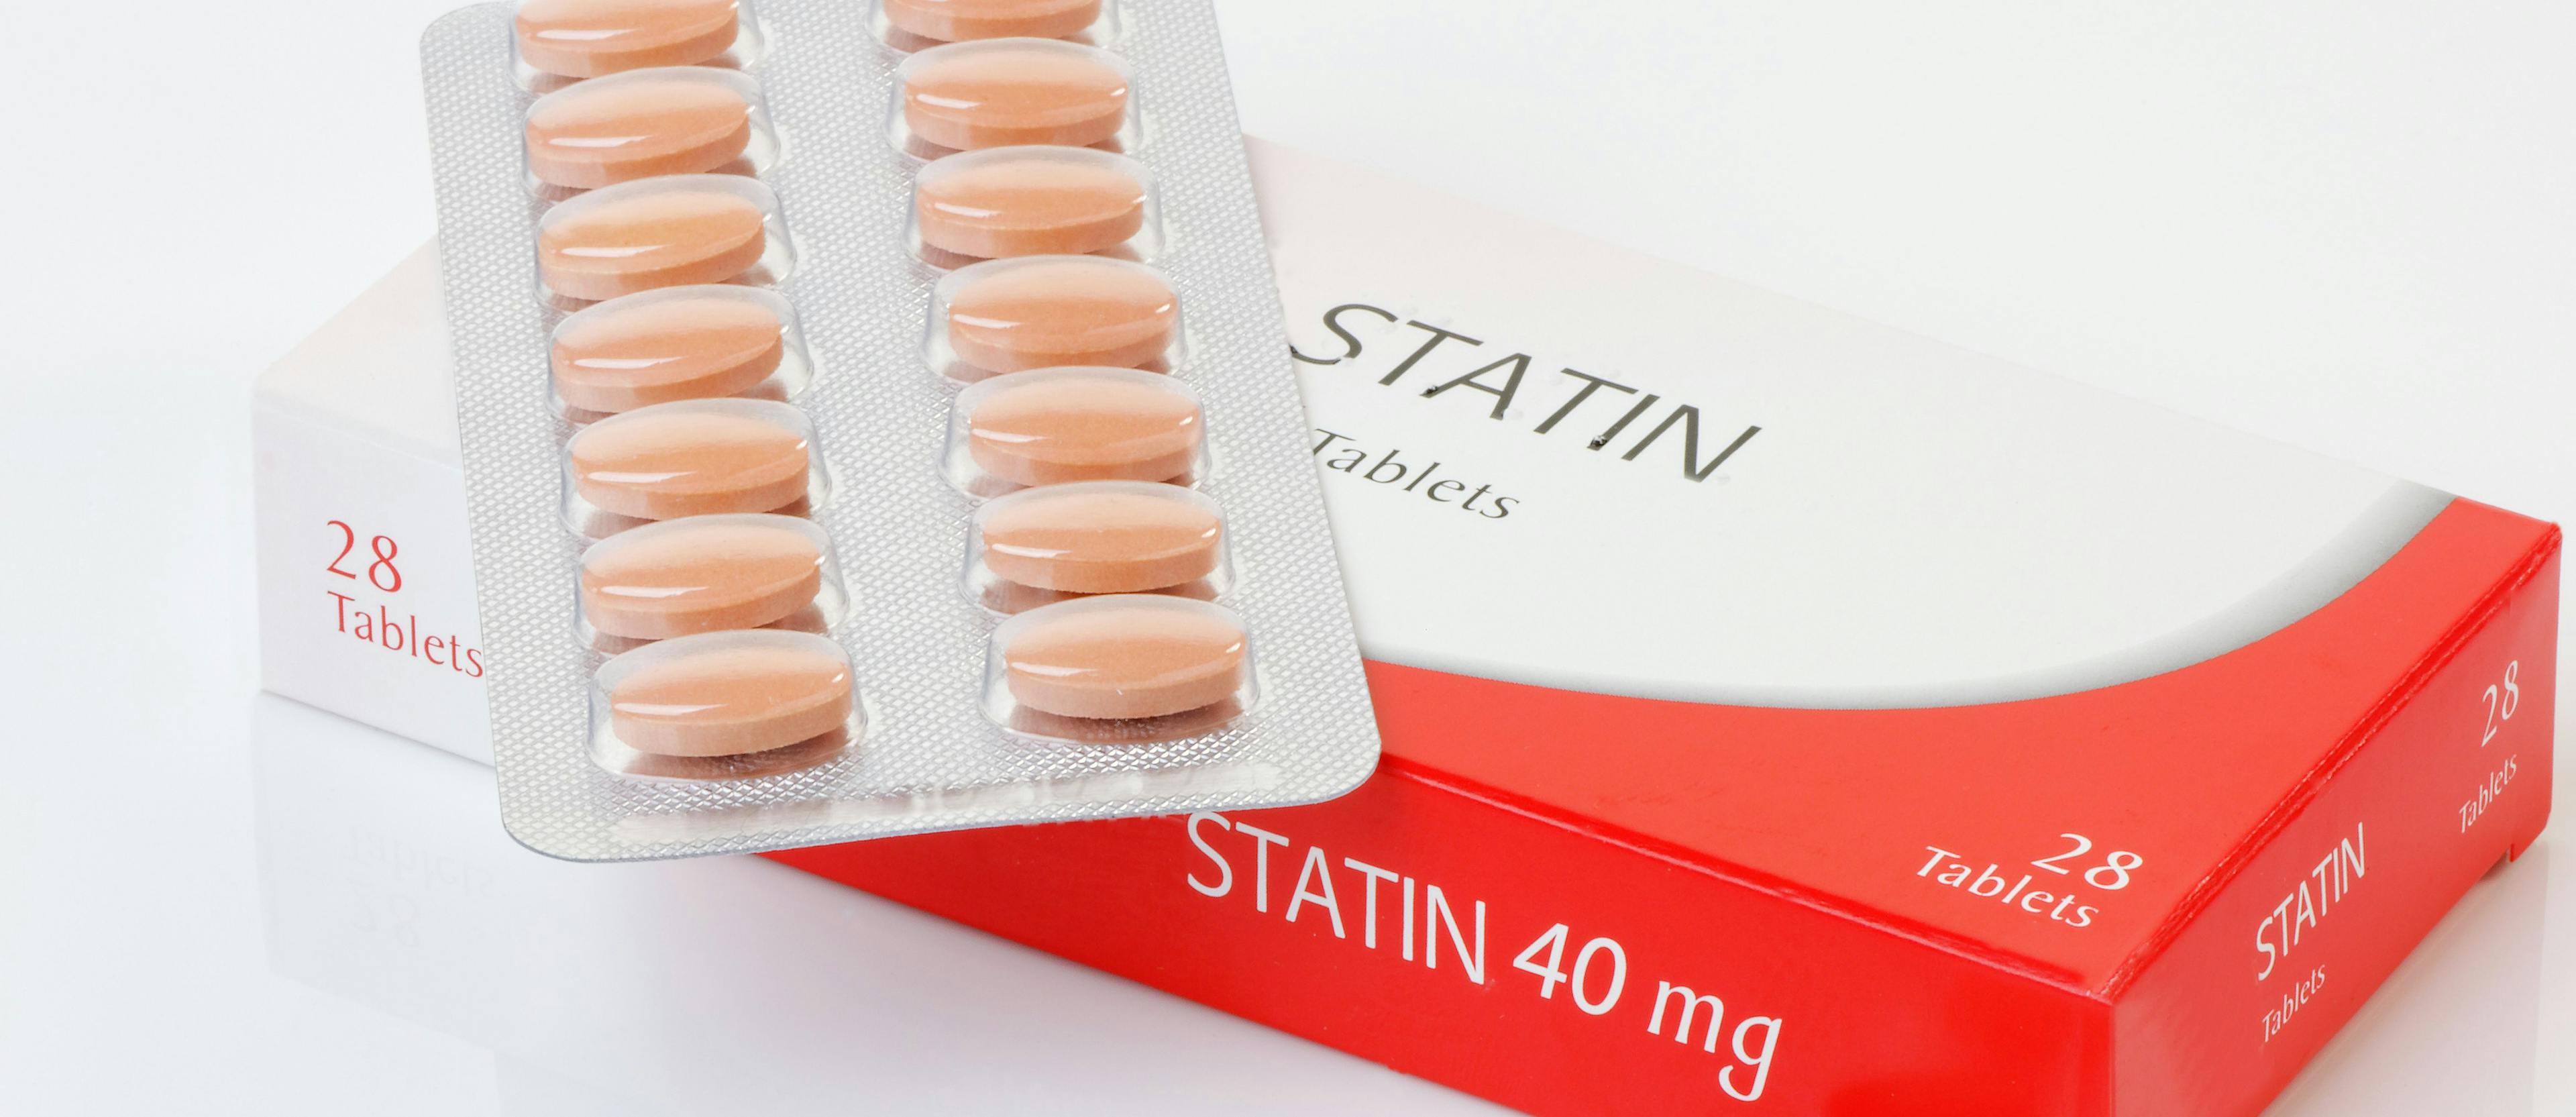 Lipid Guidelines Could Boost Youths' Statin Use